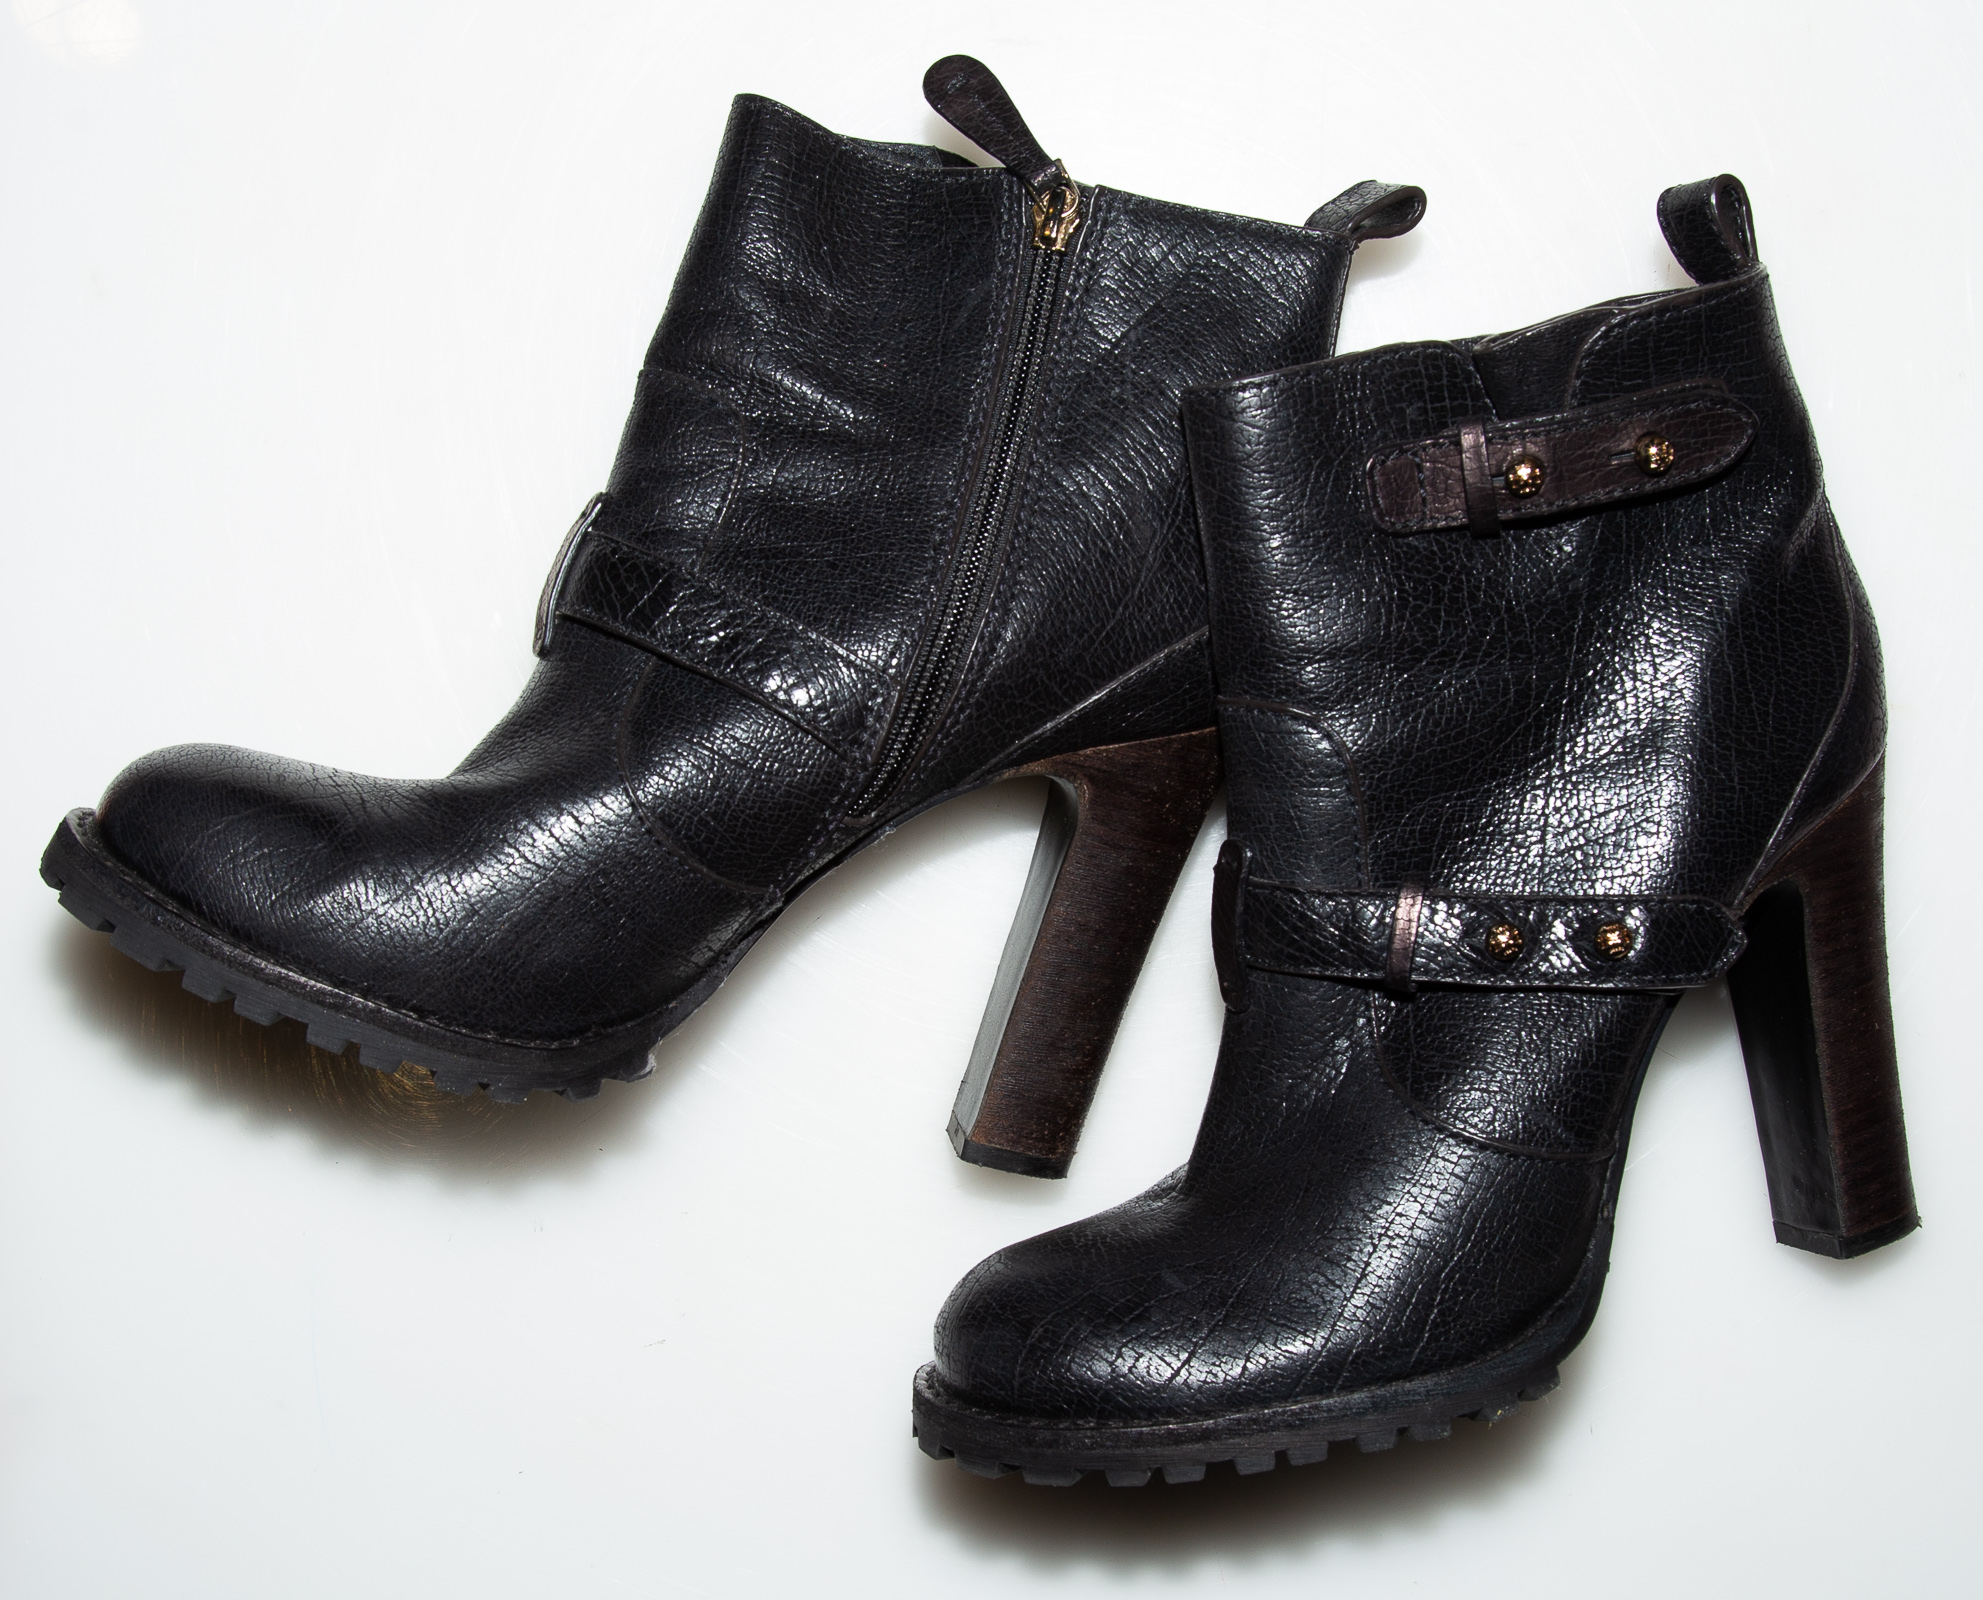 PAIR TORY BURCH BLACK LEATHER BOOTIES